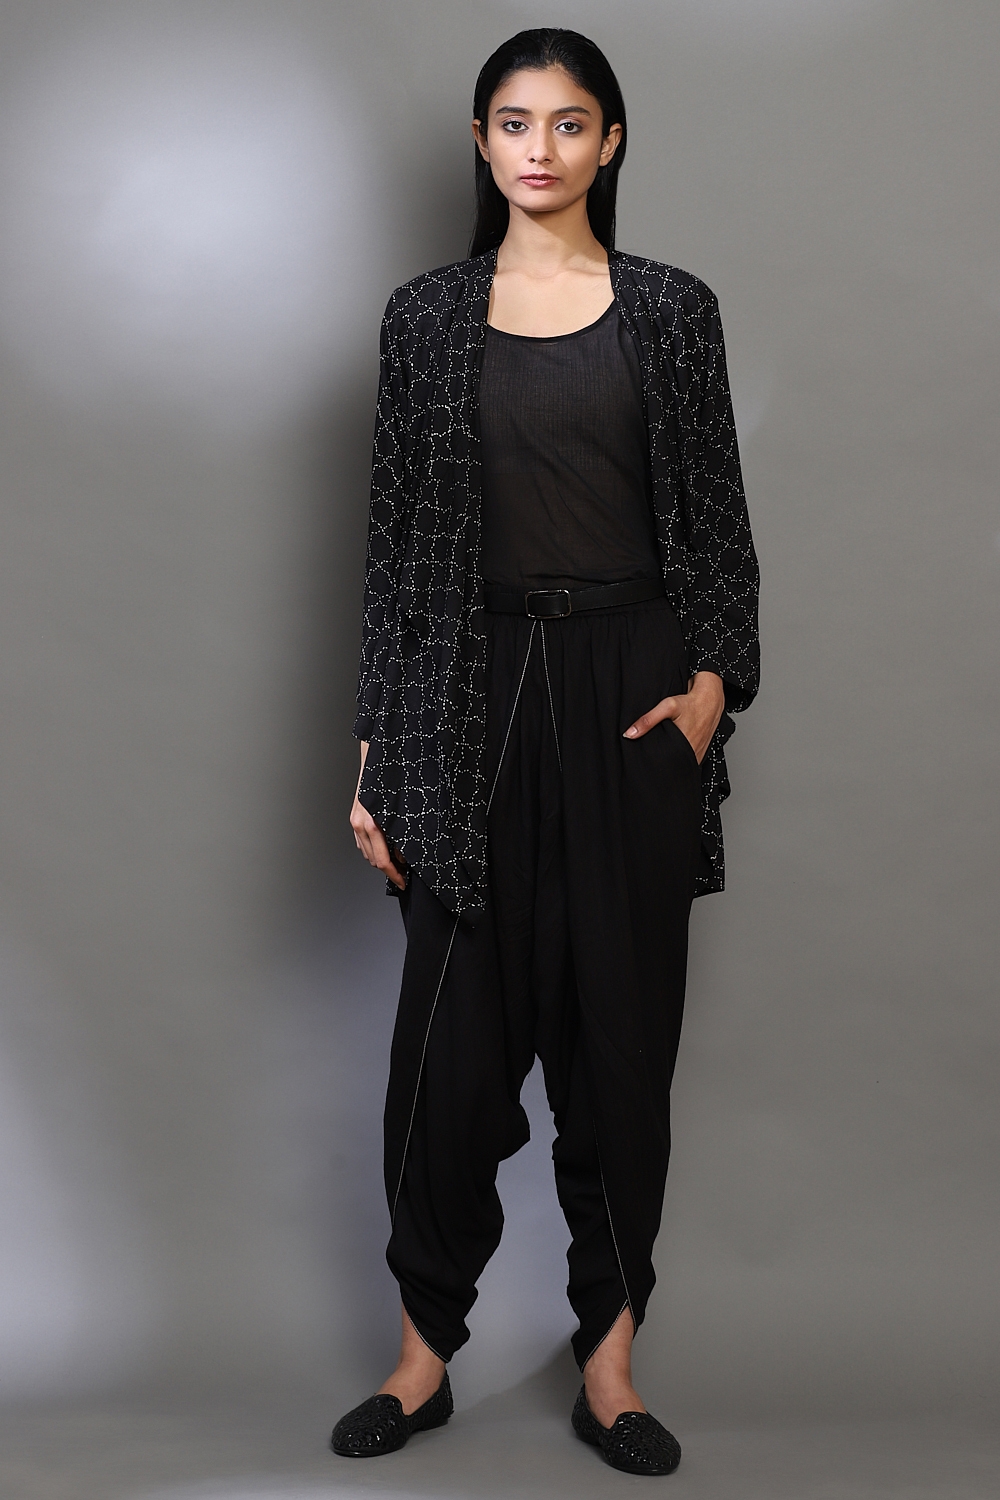 ABRAHAM AND THAKORE | Handstiched Jaali Printed Short Jacket